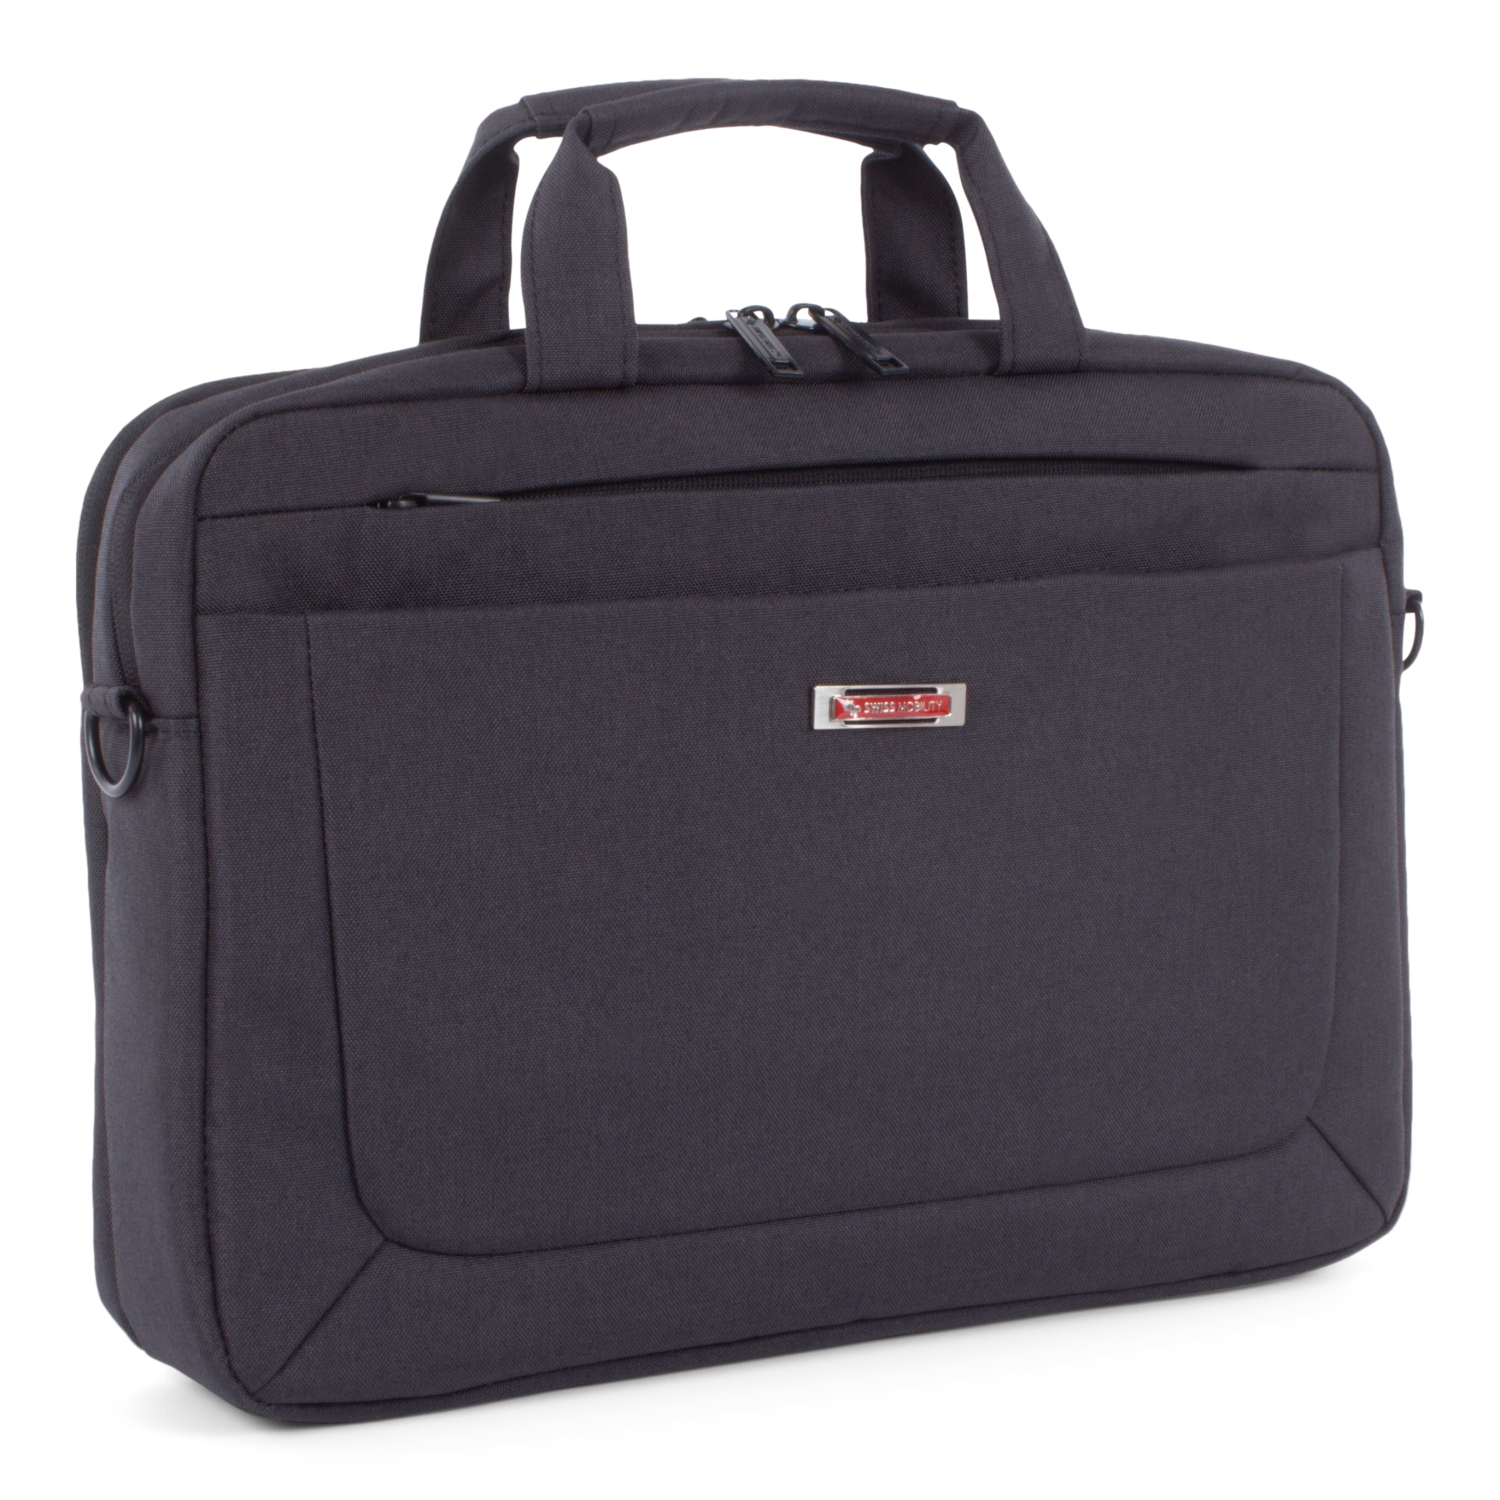 Swiss Mobility - Cadence - Briefcase - Charcoal